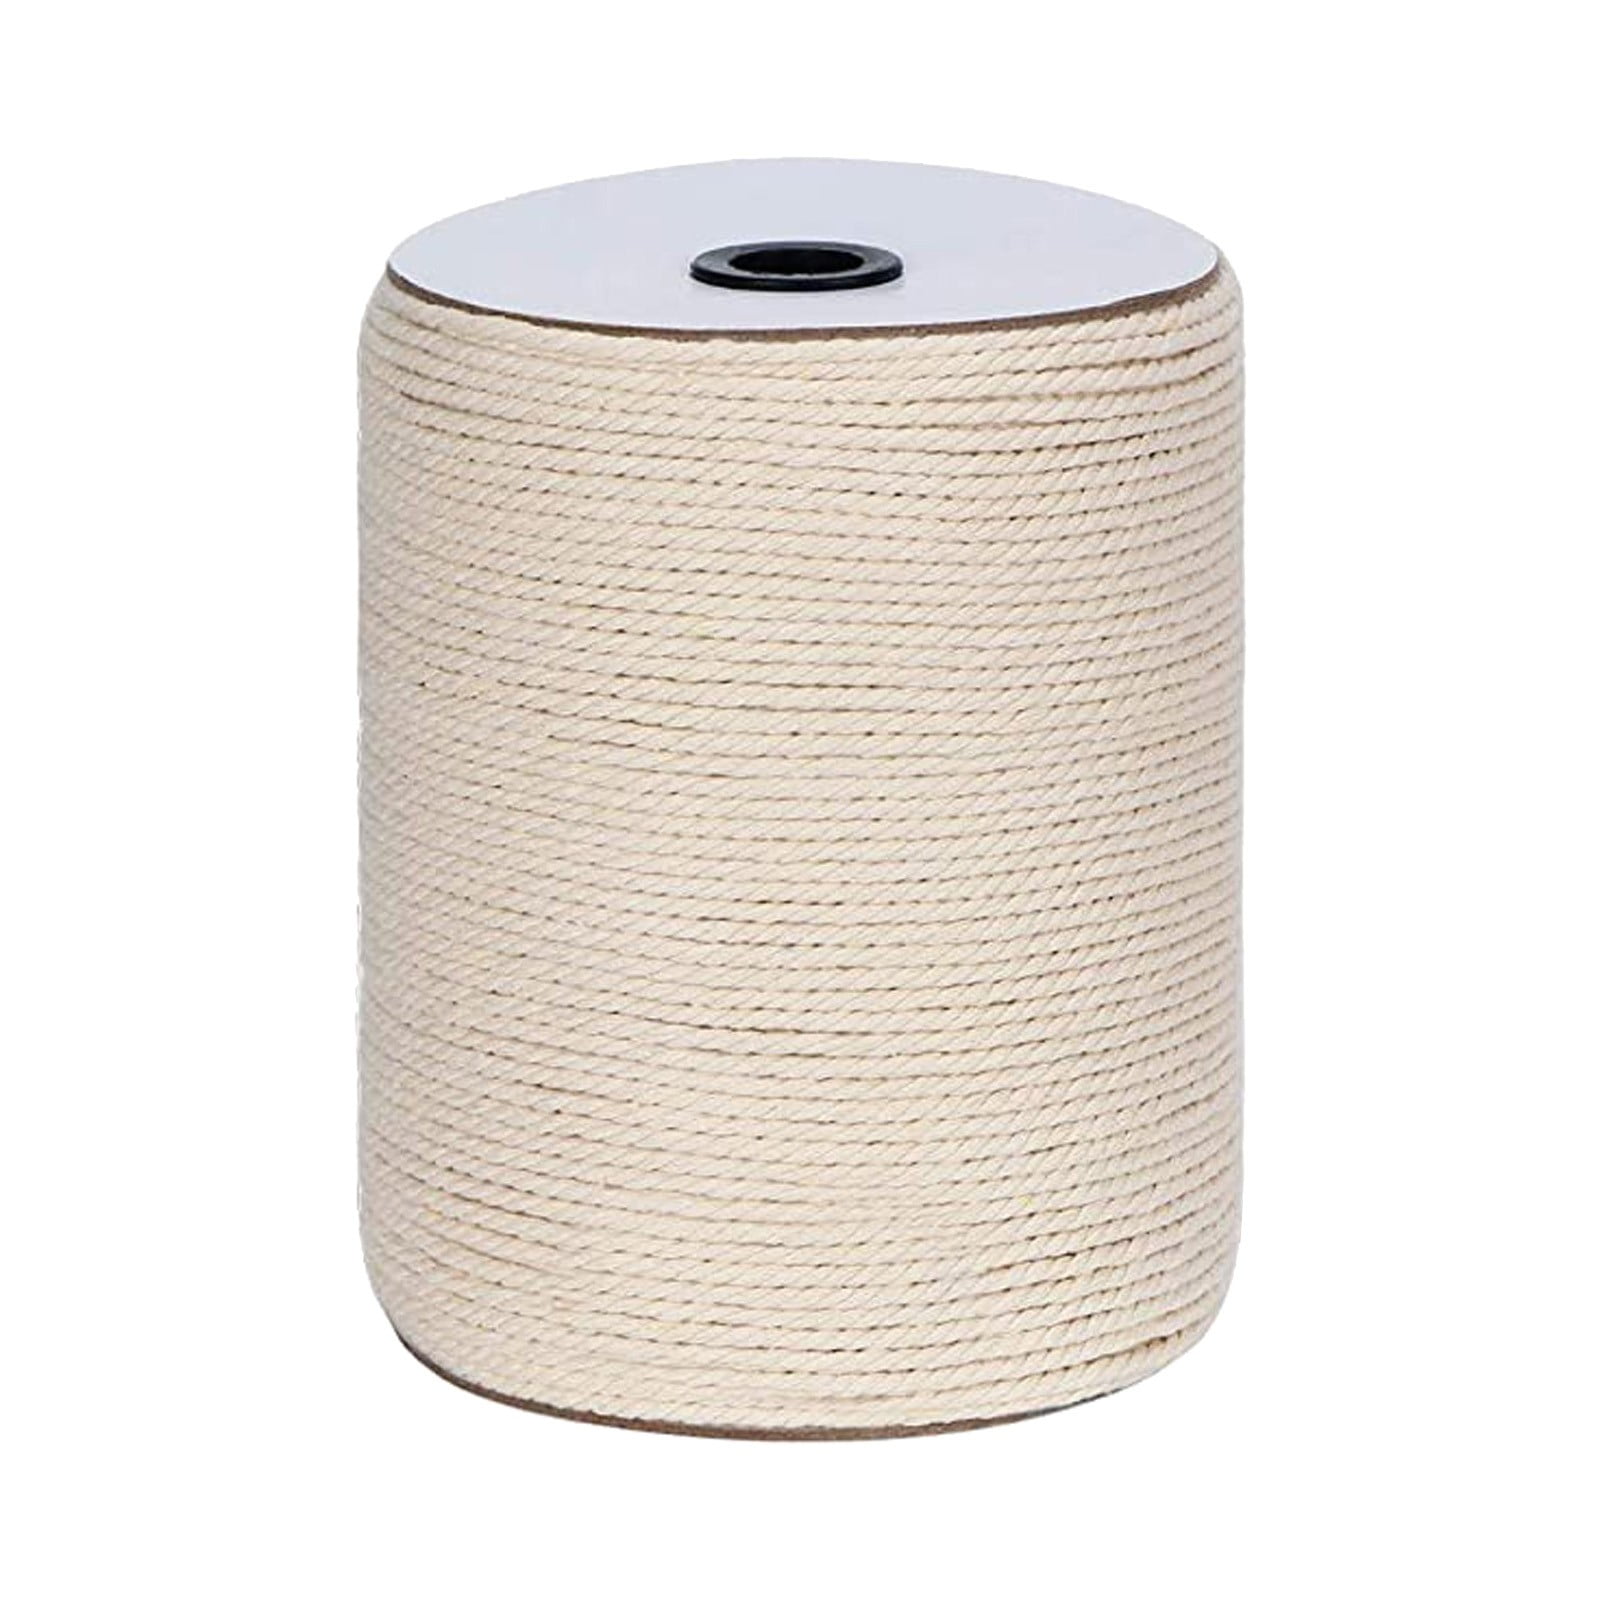 Natural Craft Macrame Cotton String Artisan Thread Double Twisted